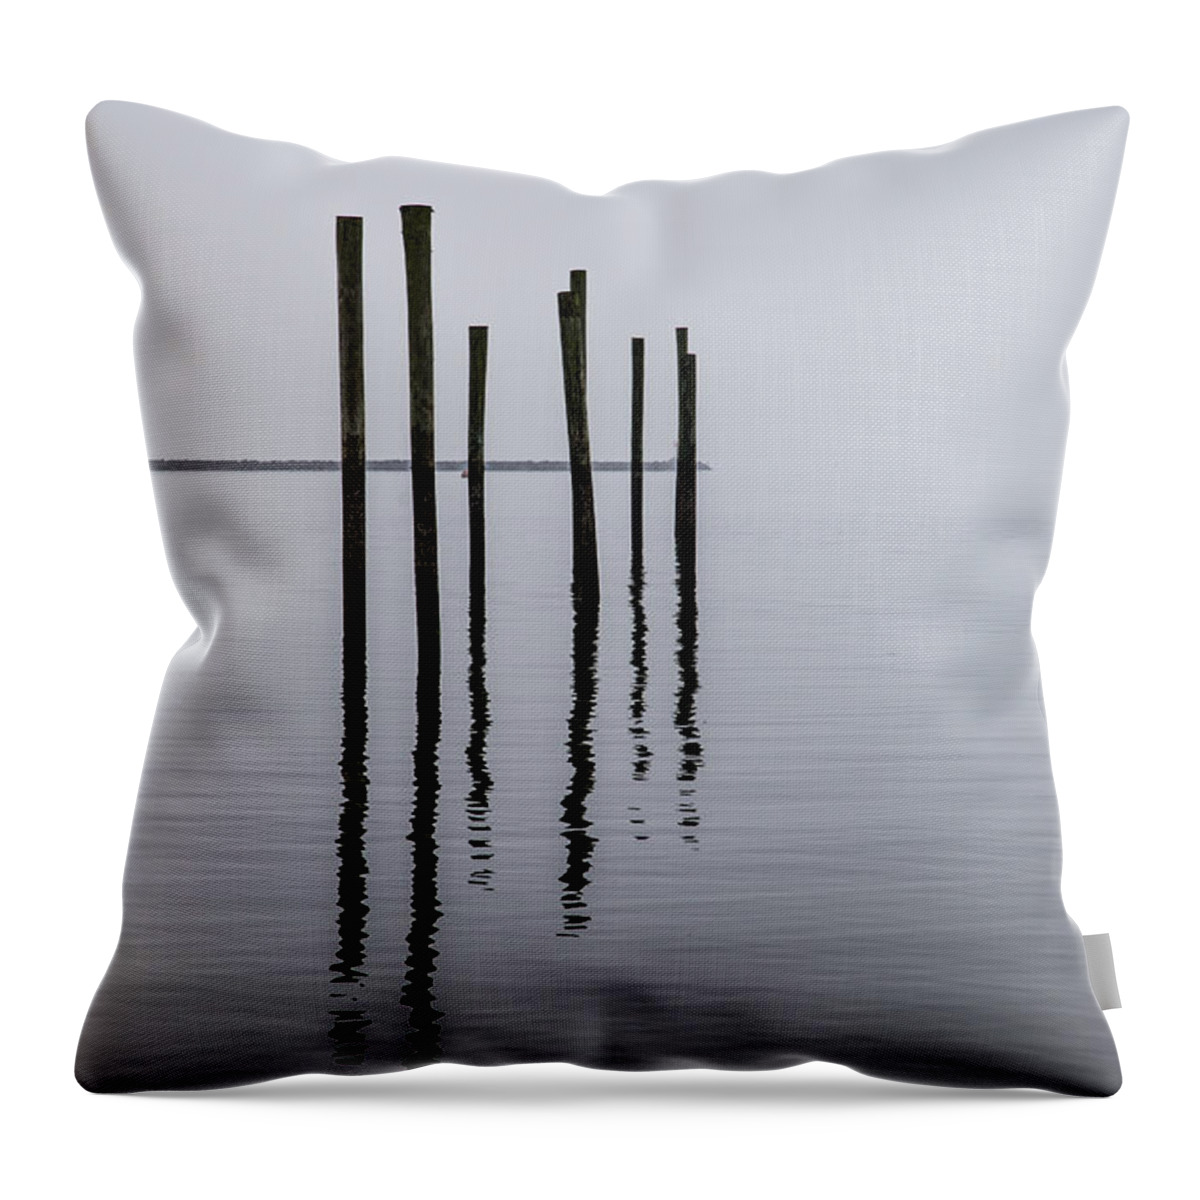 Landscape Throw Pillow featuring the photograph Reflecting Poles by Karol Livote